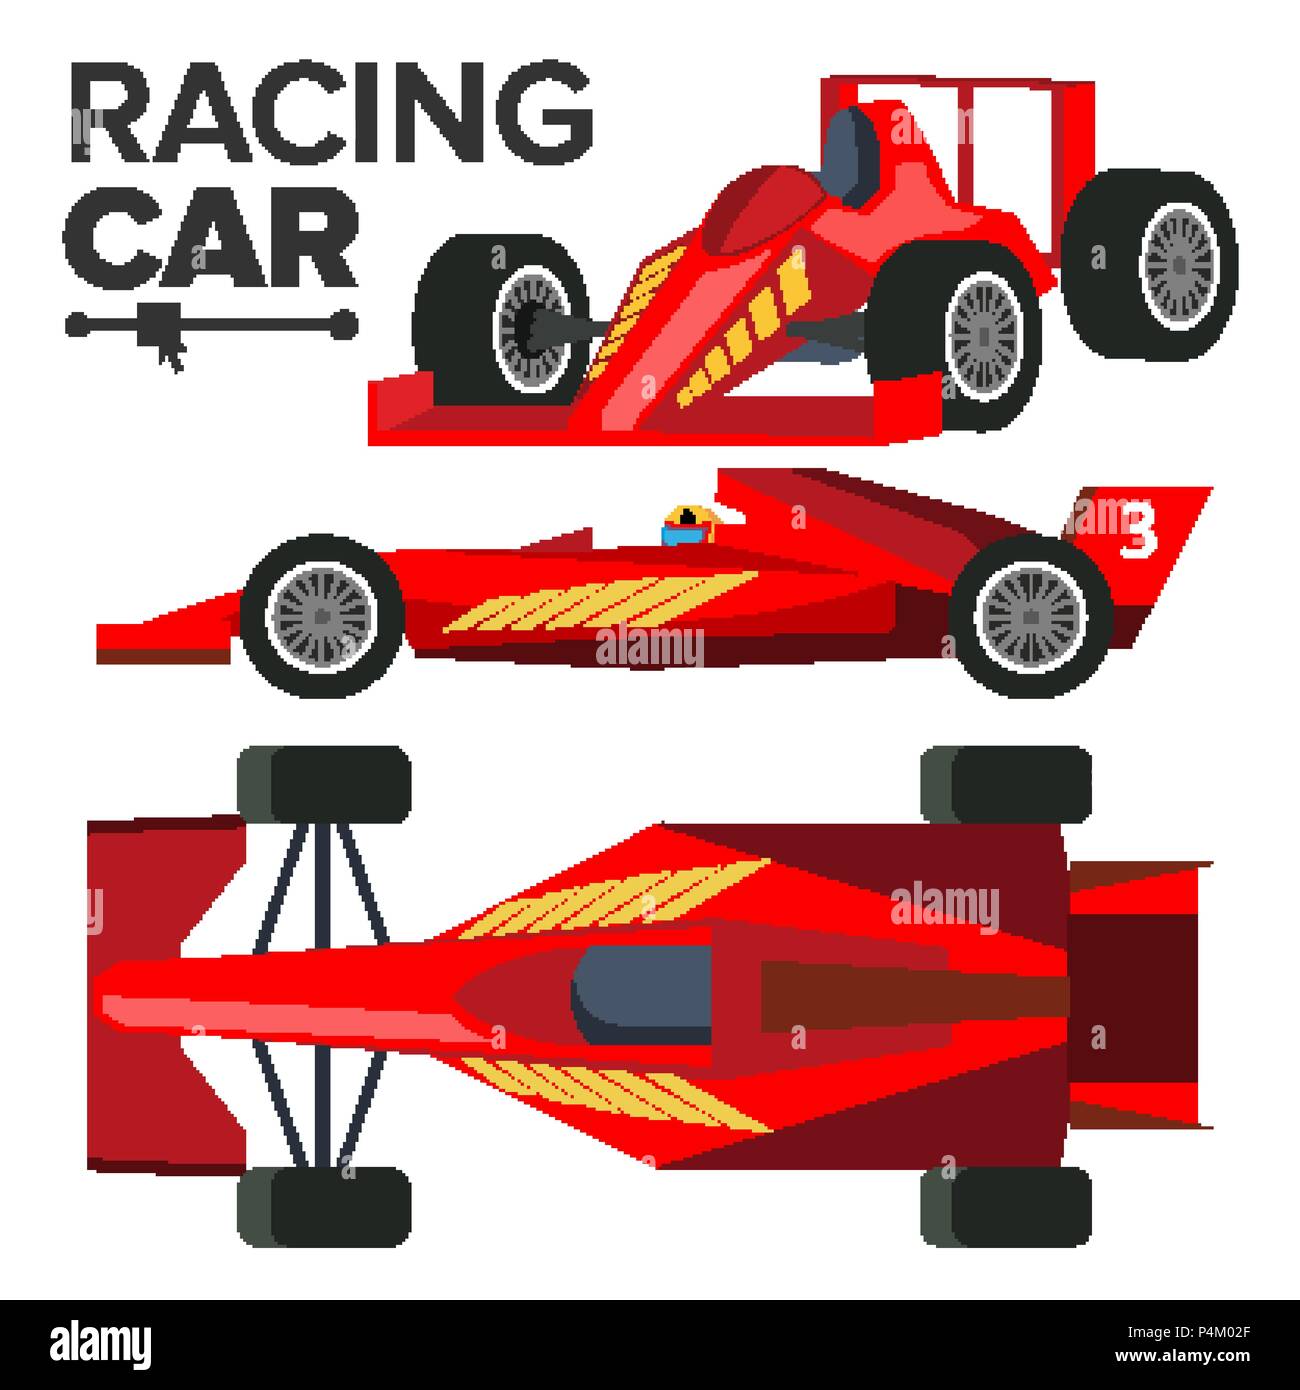 Racing Car Bolid Vector. Sport Red Racing Car. Front, Side, Back View. Auto Drawing. Illustration Stock Vector